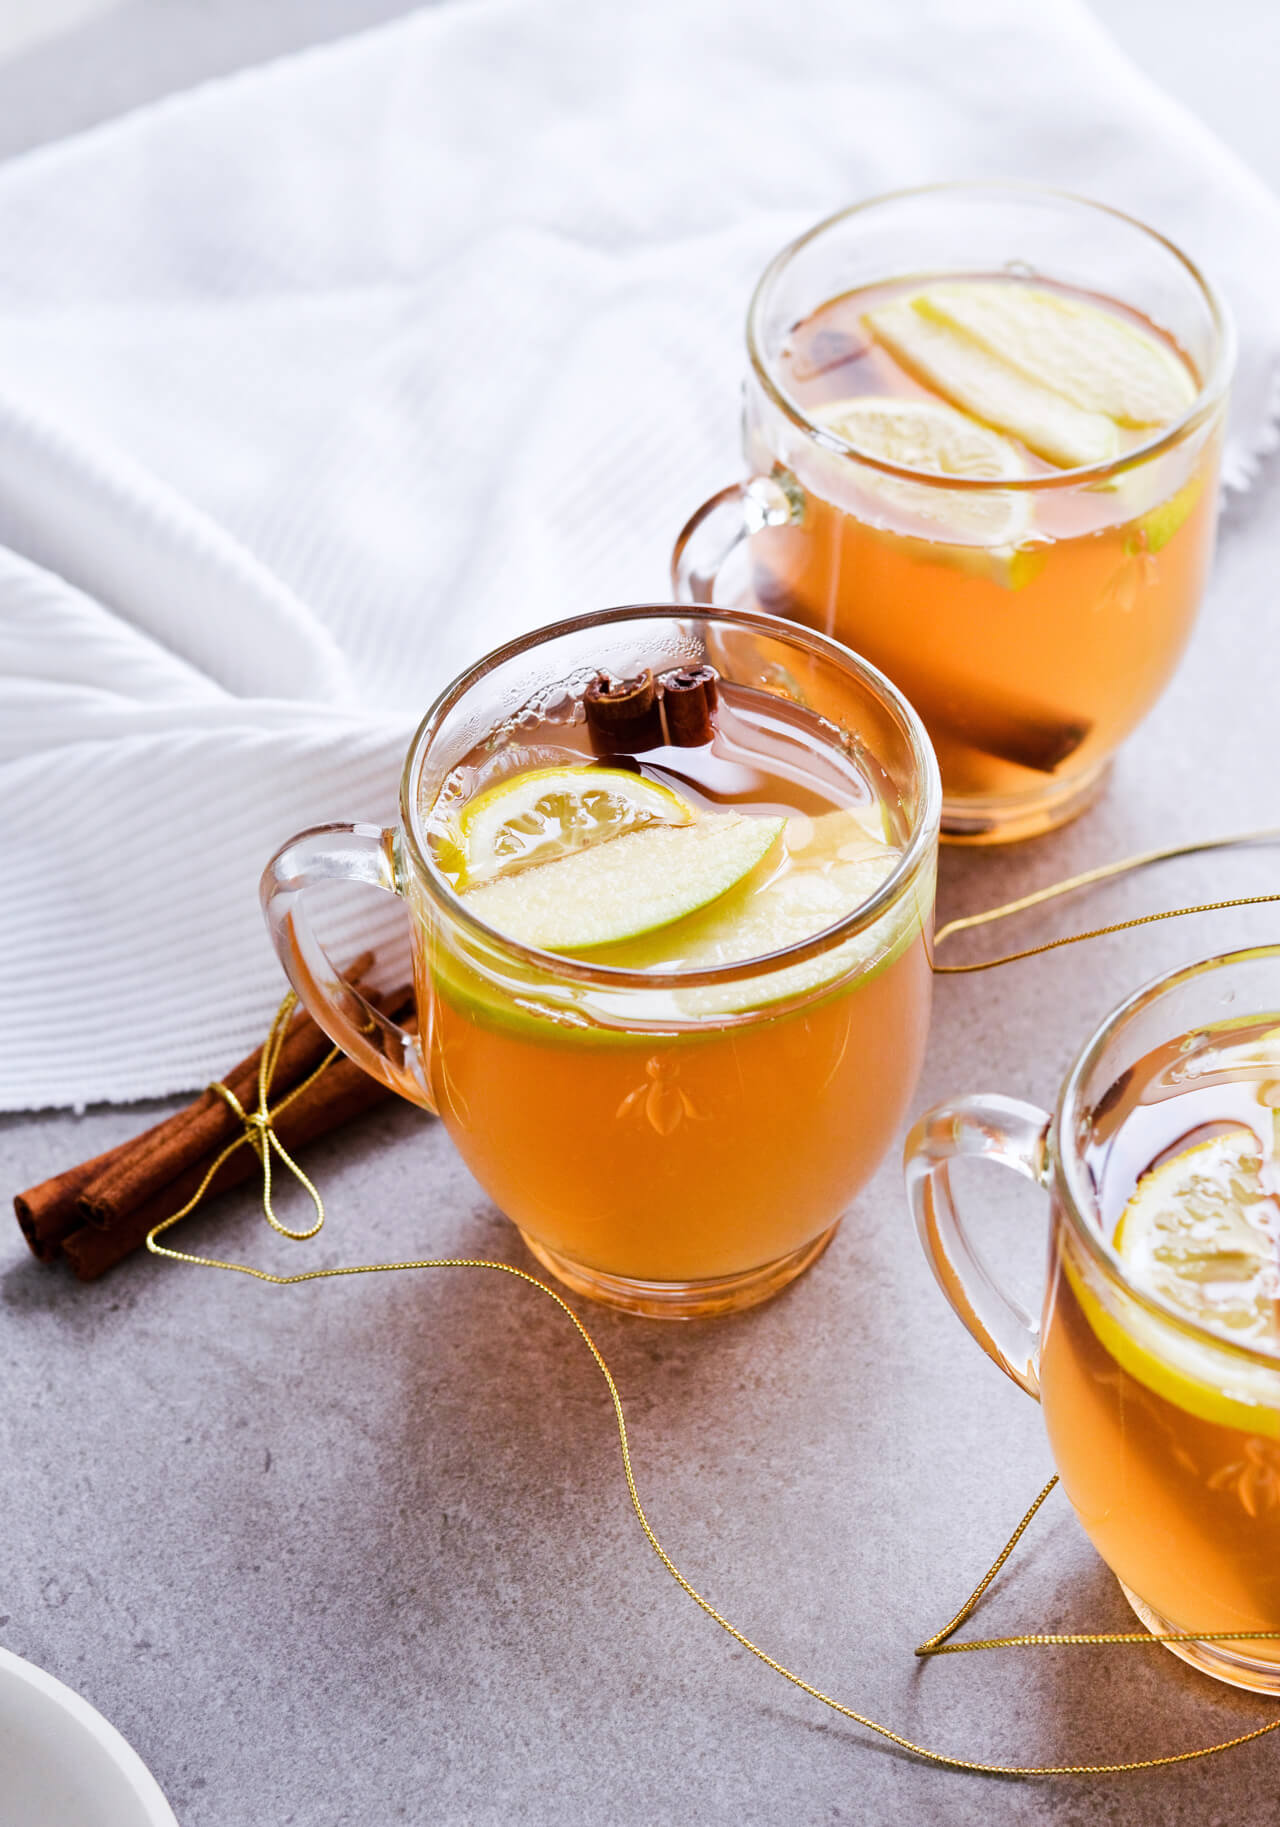 Apple mulled white wine offers a new twist on and old classic! The perfect winter drink, it's a warm mix of wine, apples and cinnamon. Great for gatherings, holiday parties or quiet weekends at home. Done in under 30 minutes! | @mitzyathome